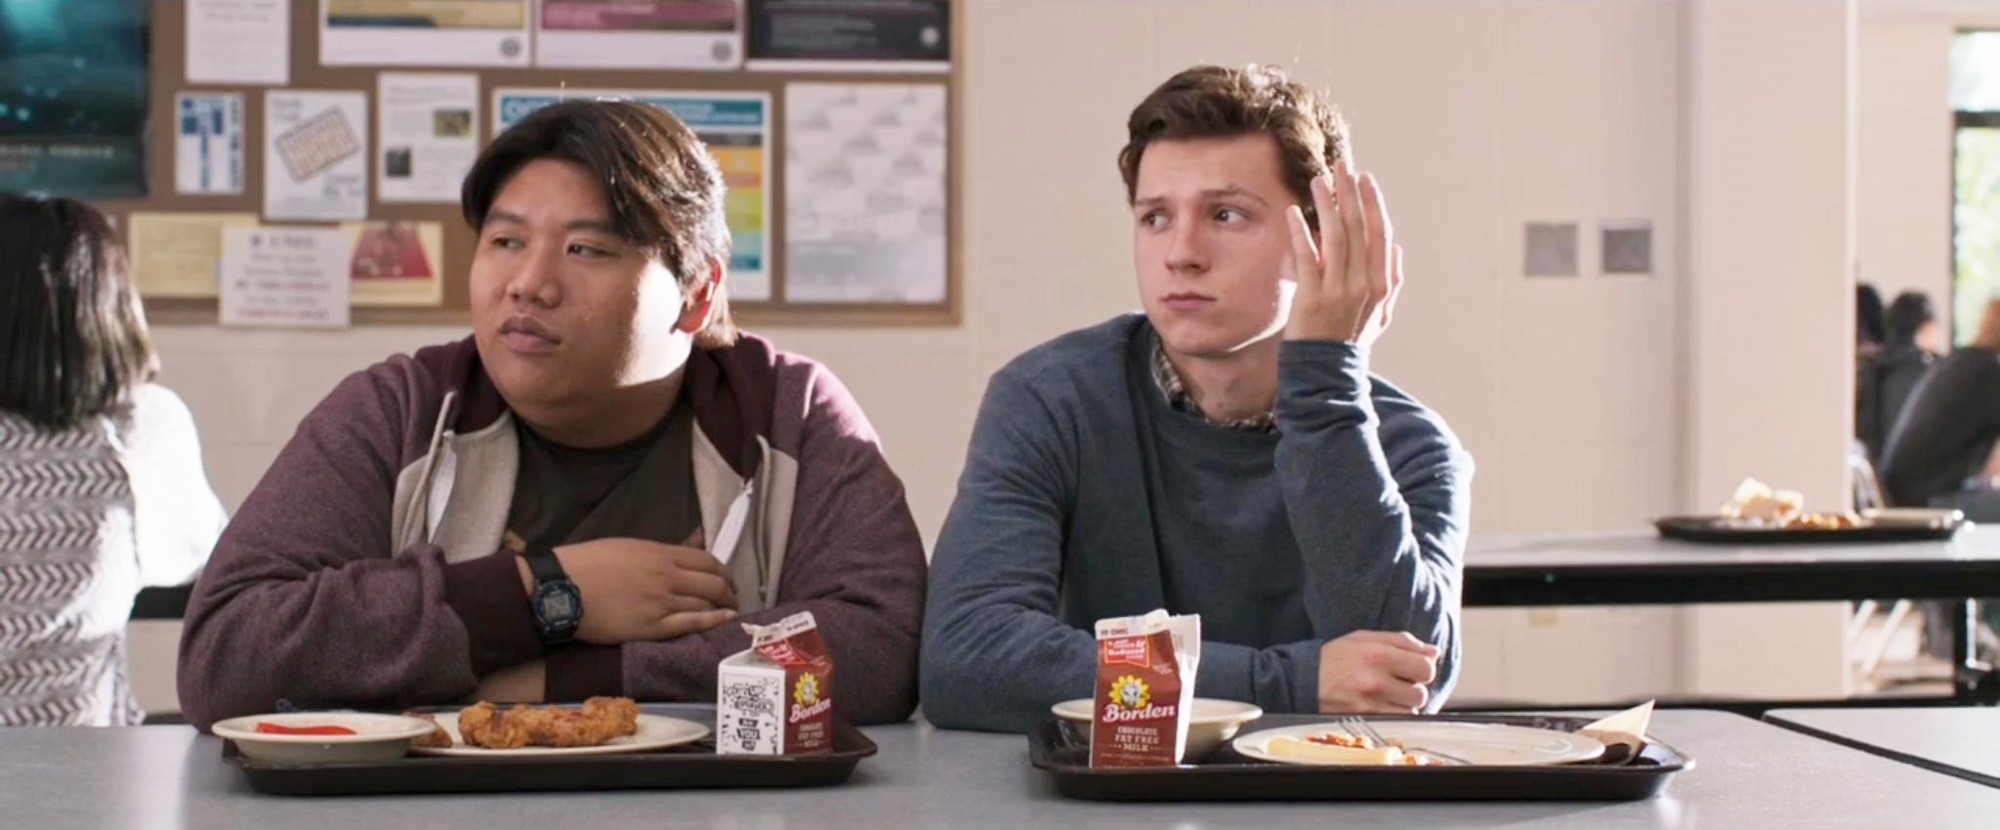 Jacob Batalon stars as Ned Leeds and Tom Holland stars as Peter Parker/Spider-Man in Sony Pictures' Spider-Man: Homecoming (2017)